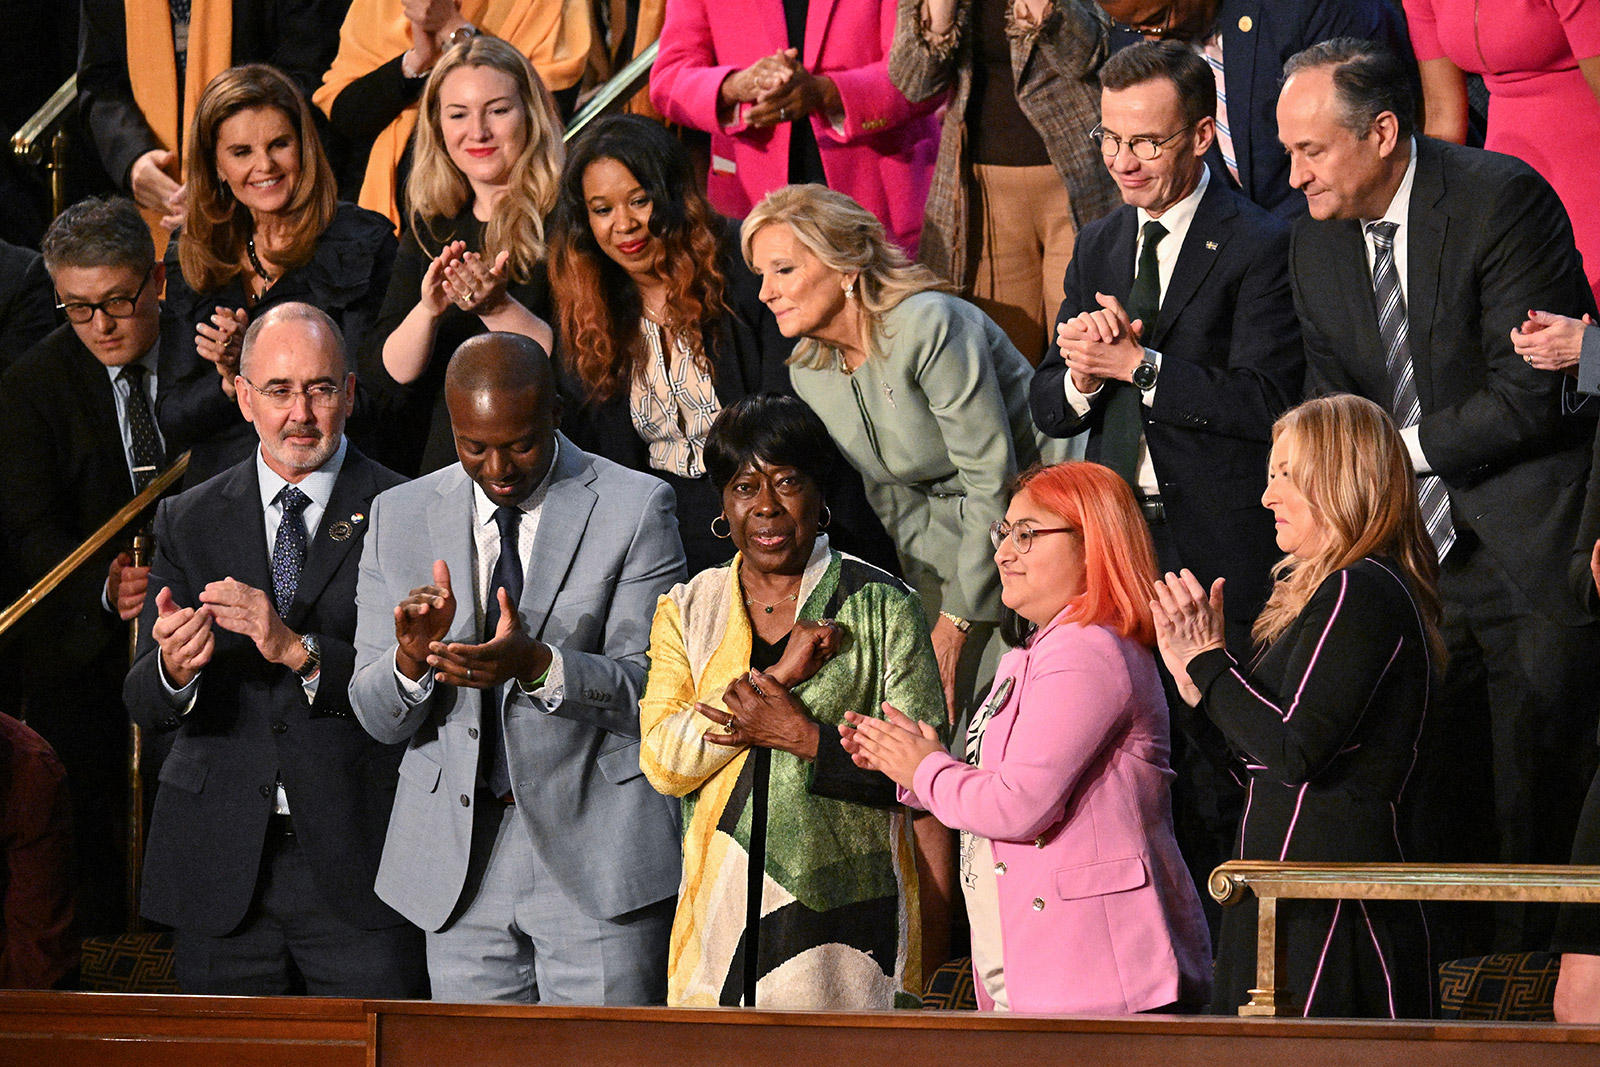 Civil rights activist Bettie Mae Fikes, bottom center, stands as she is recognized by Biden.